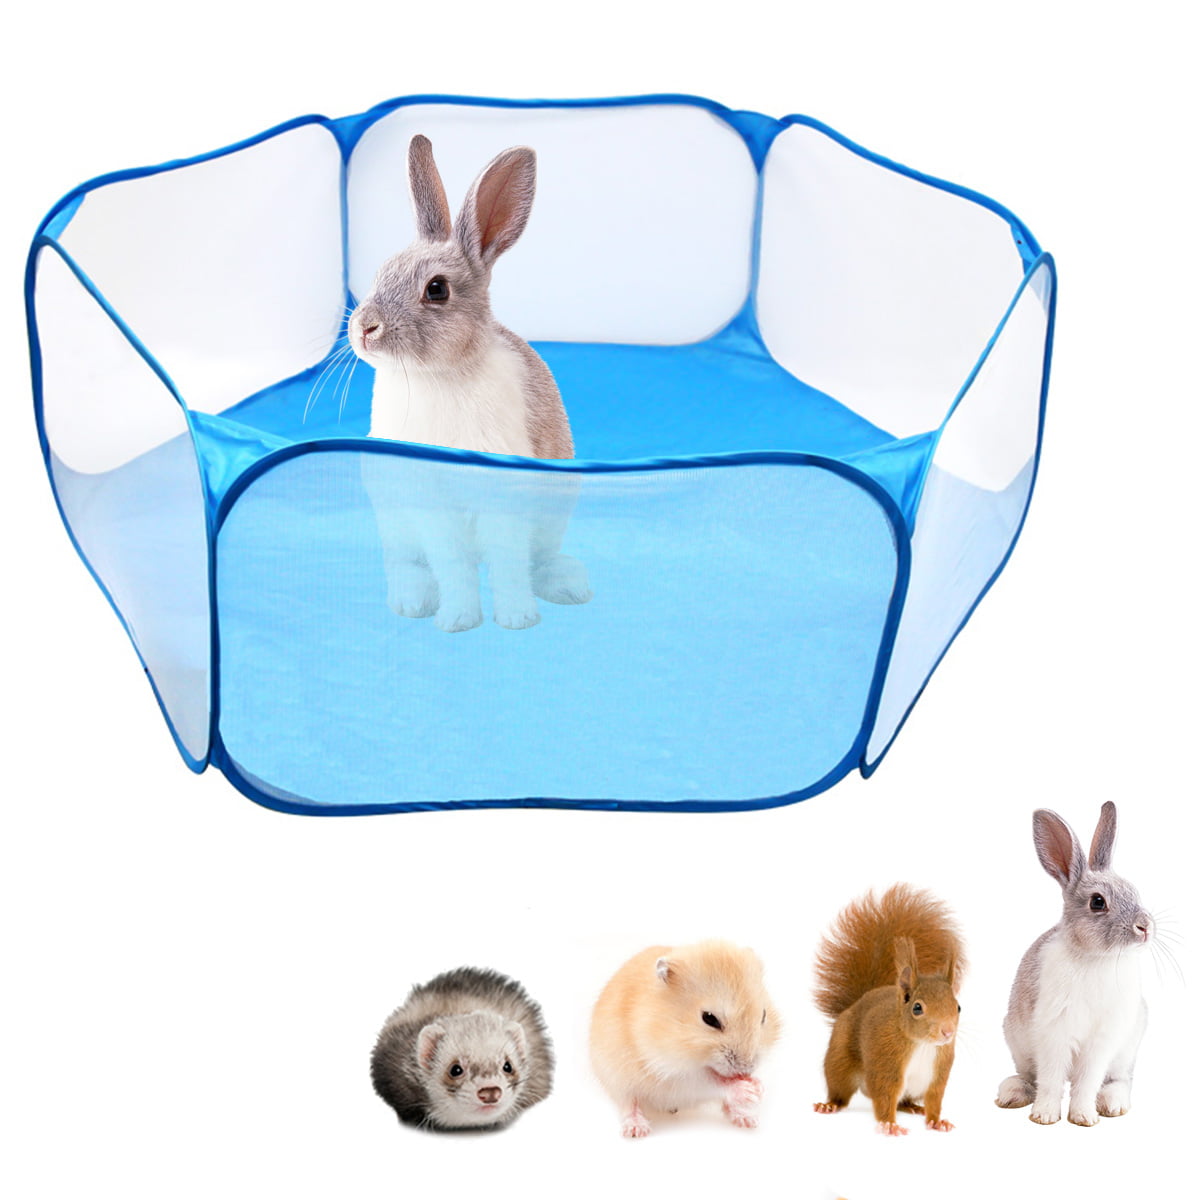 Foldable Small Animal Playpen Cage Tent with Cover Fabric Mesh Outdoor Indoor Run Play Pen Exercise Fence Small Animal Cage Pen Pets Pop up Playpen for Guinea Pig Rabbit Hamster Chinchilla Hedgehog